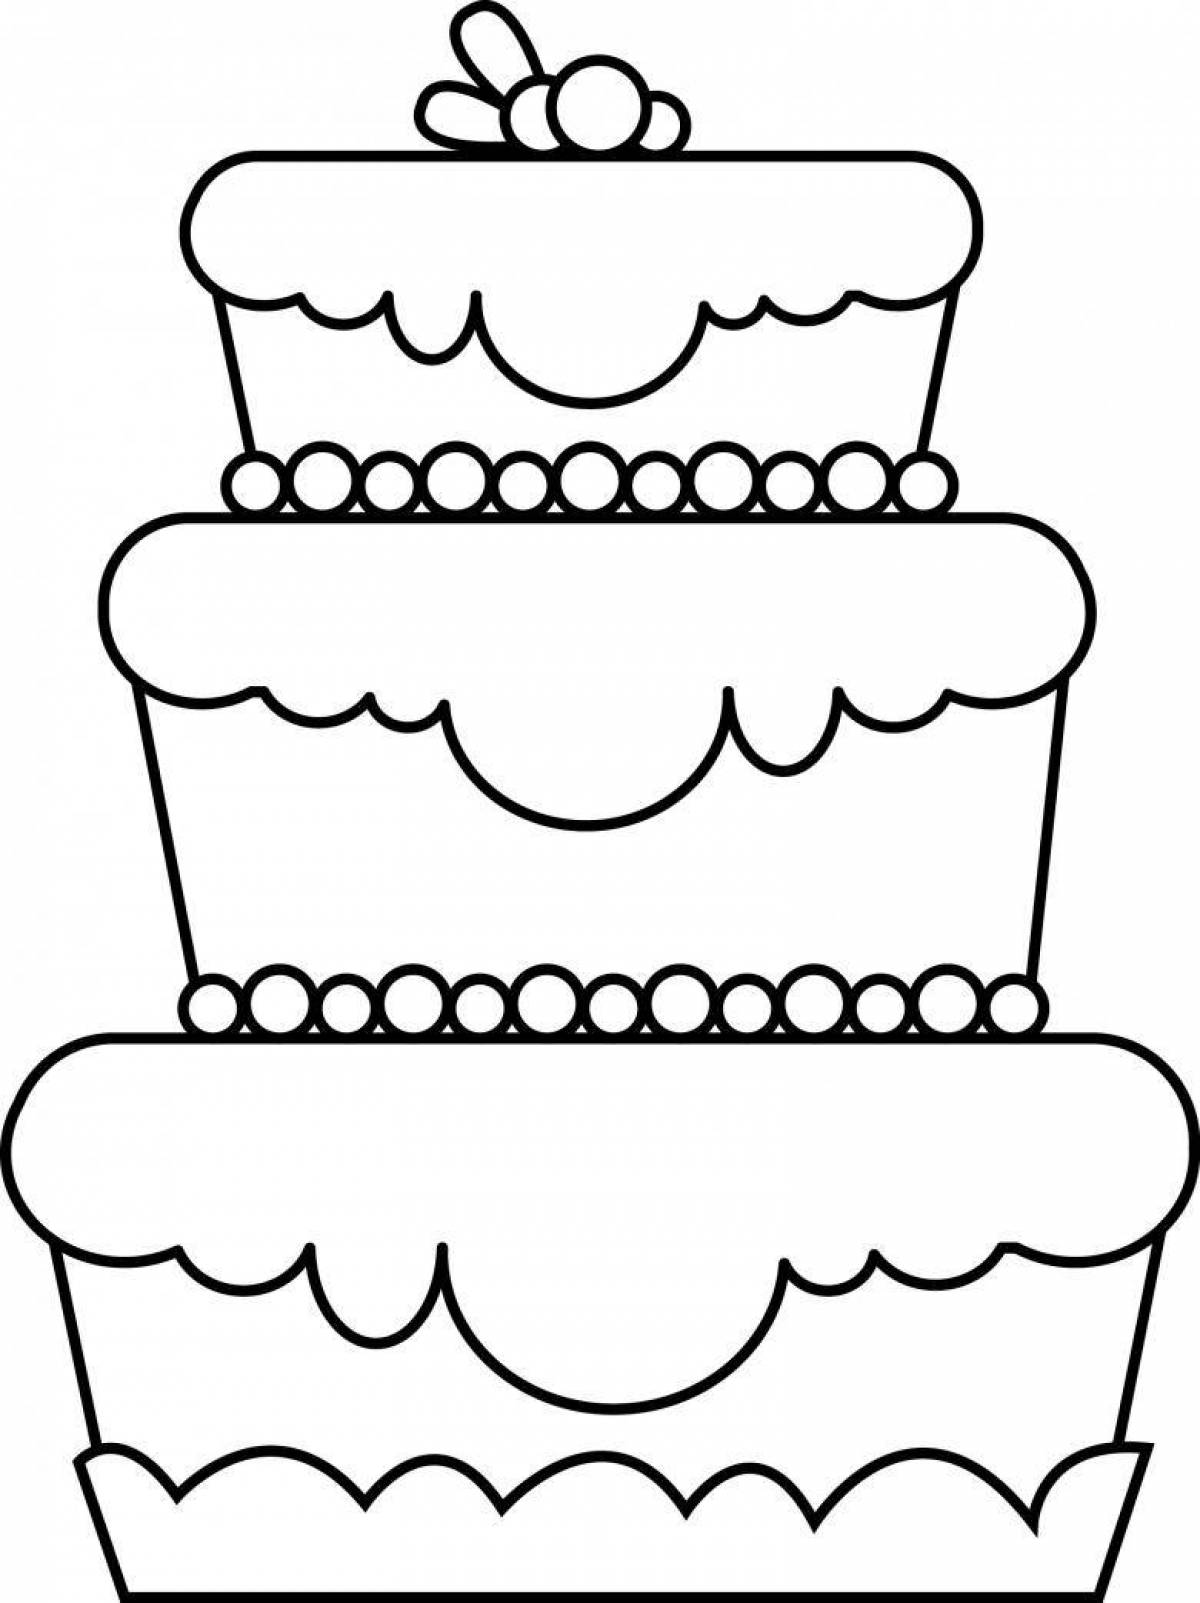 Exciting cake coloring page